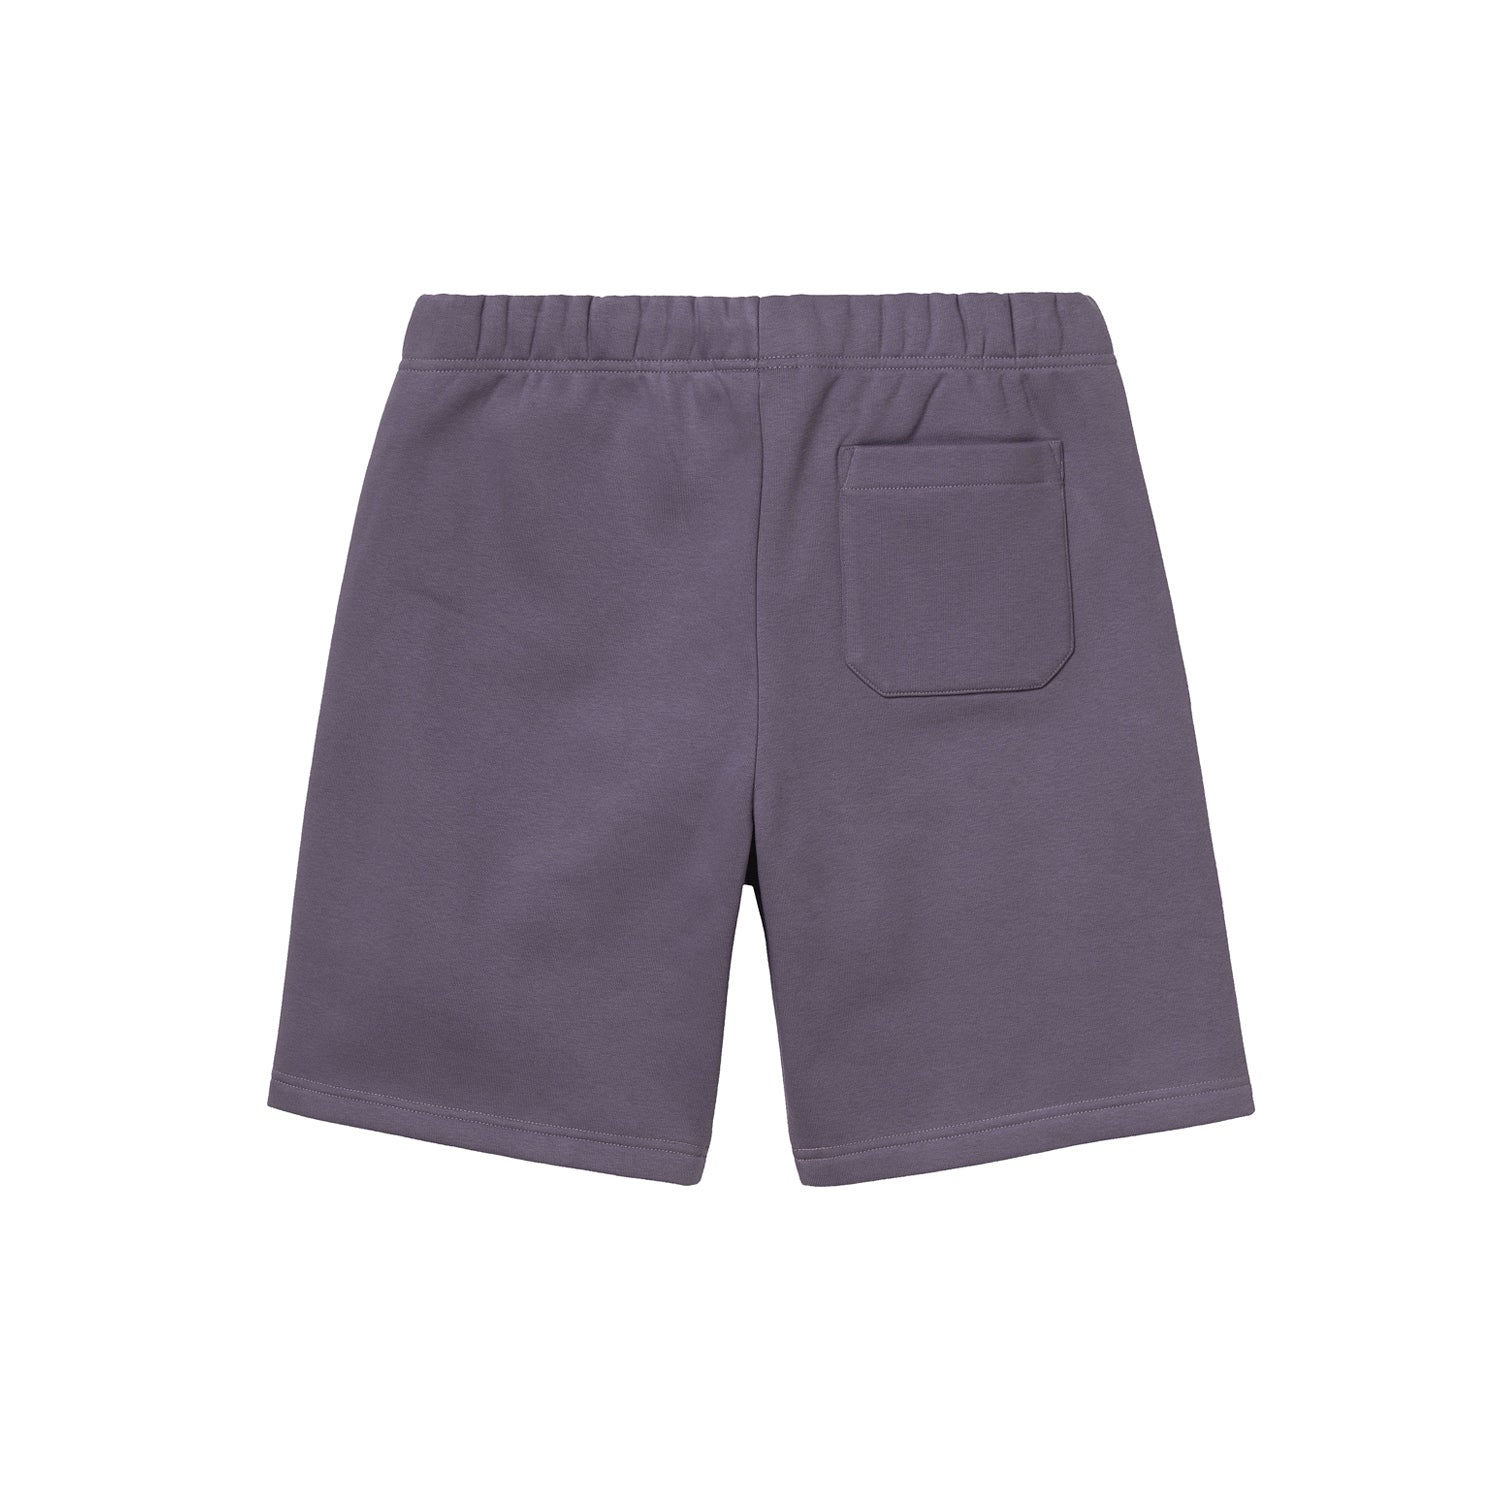 Carhartt WIP Chase Sweat Short Provence/Gold